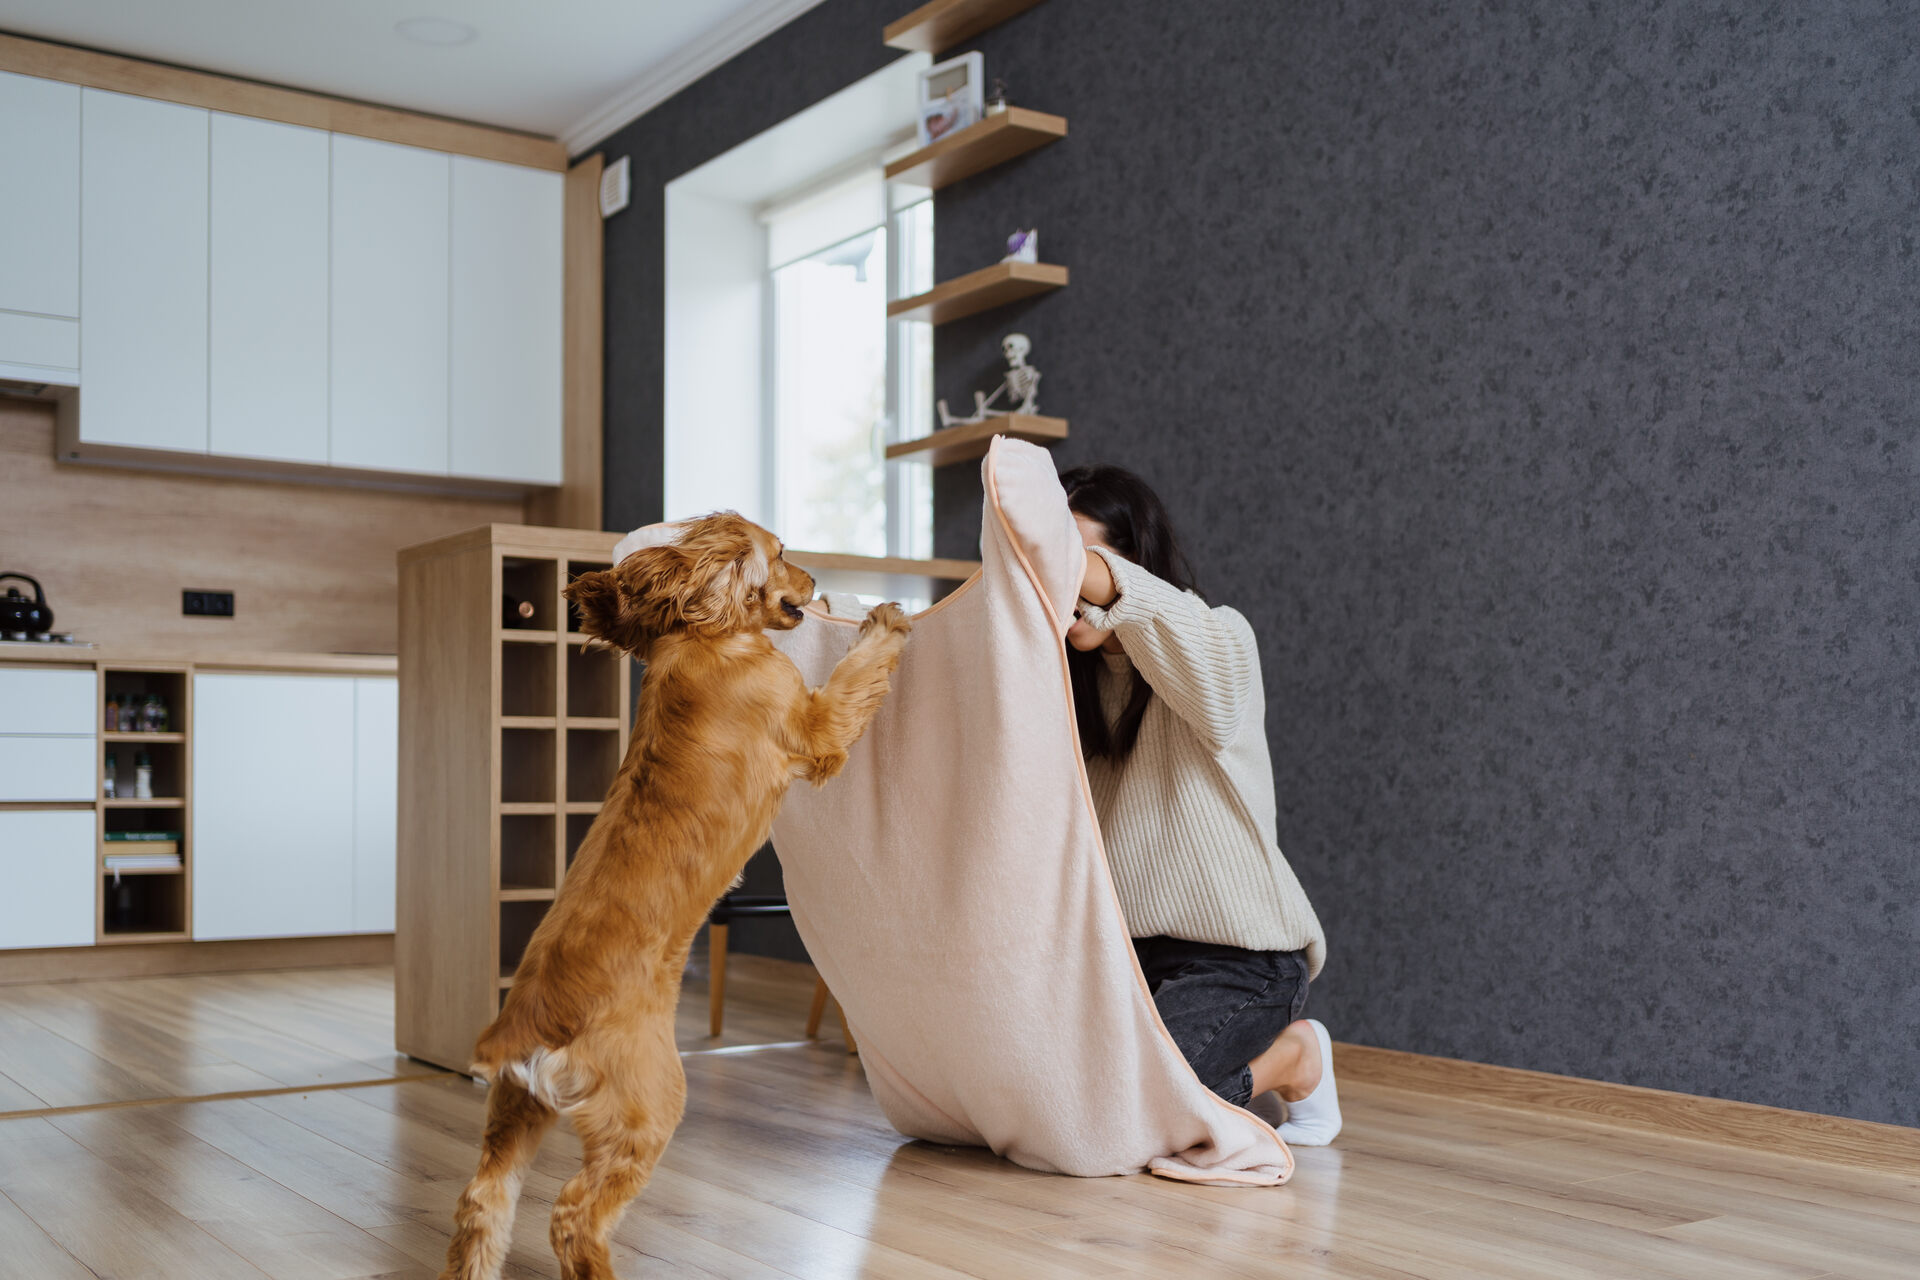 A woman playing with her dog indoors